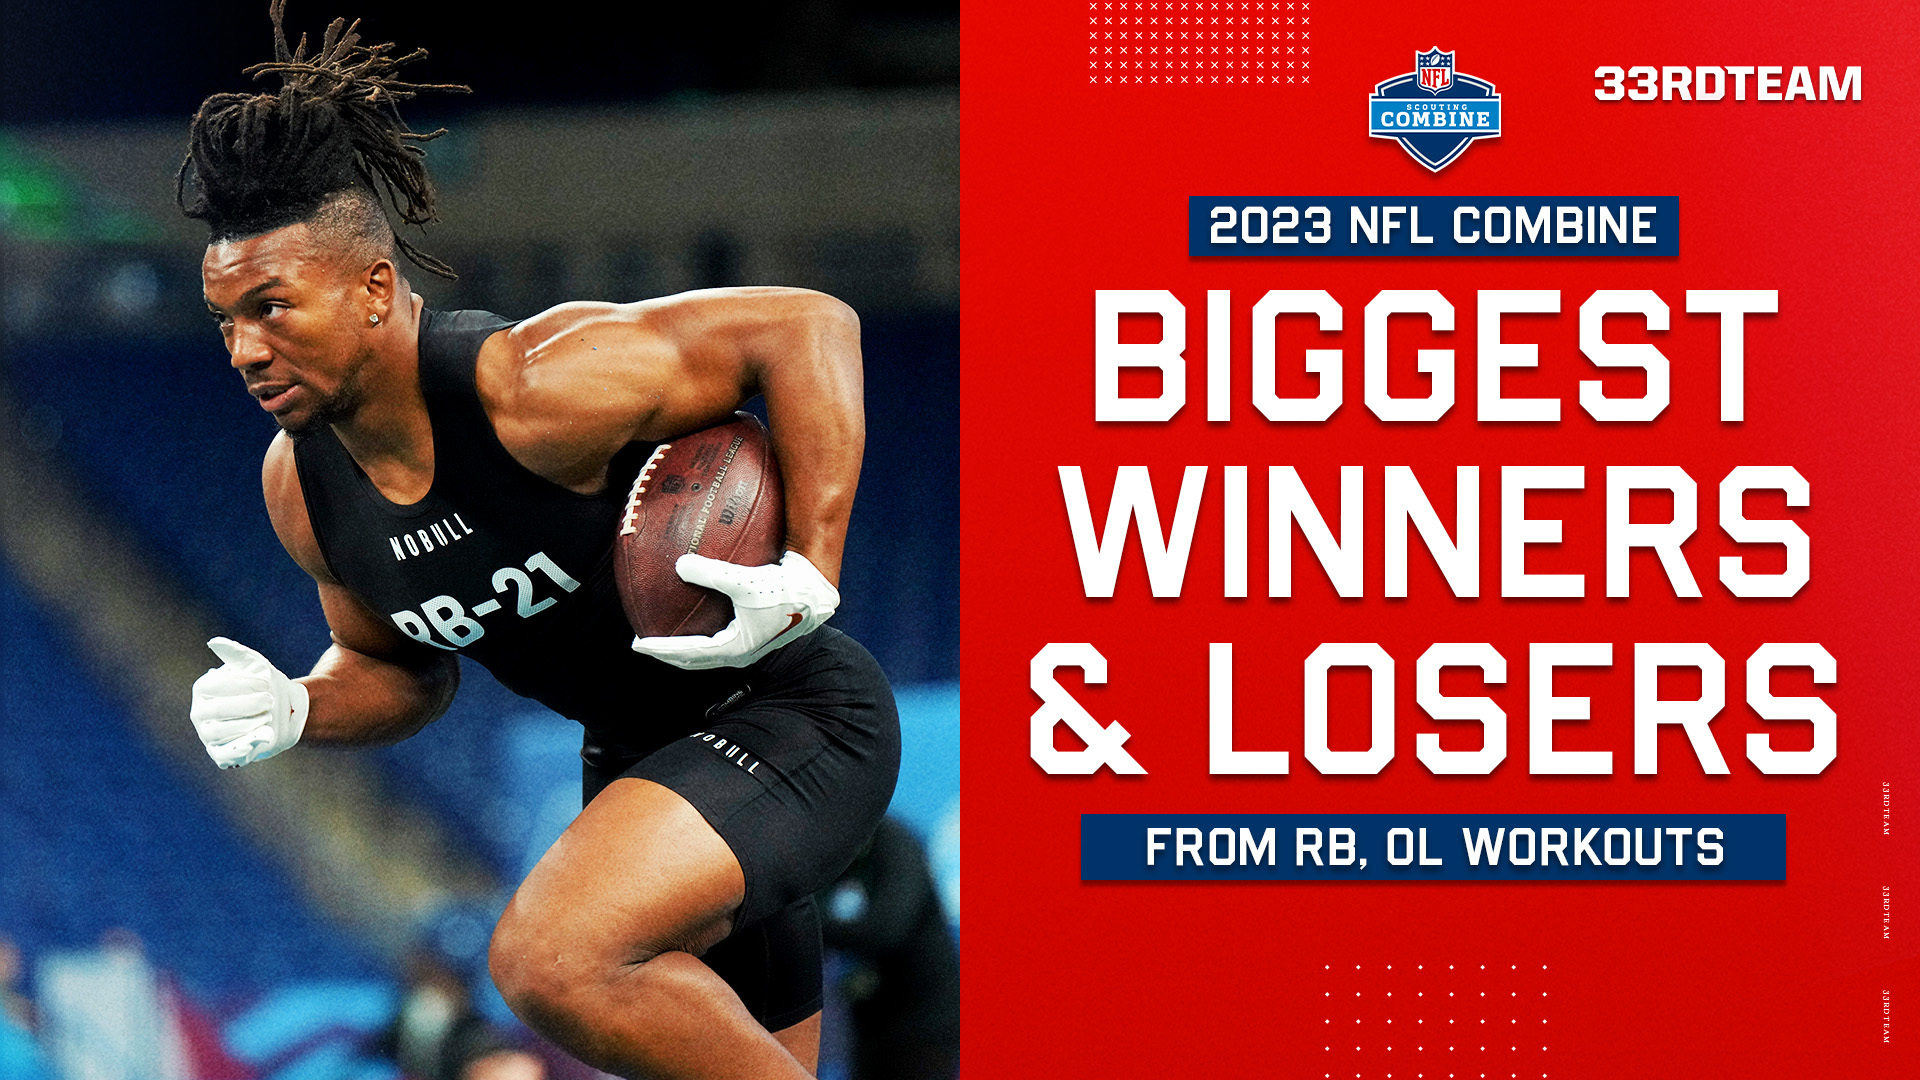 2023 NFL Combine: Biggest Winners and Losers From RB, OL Workouts